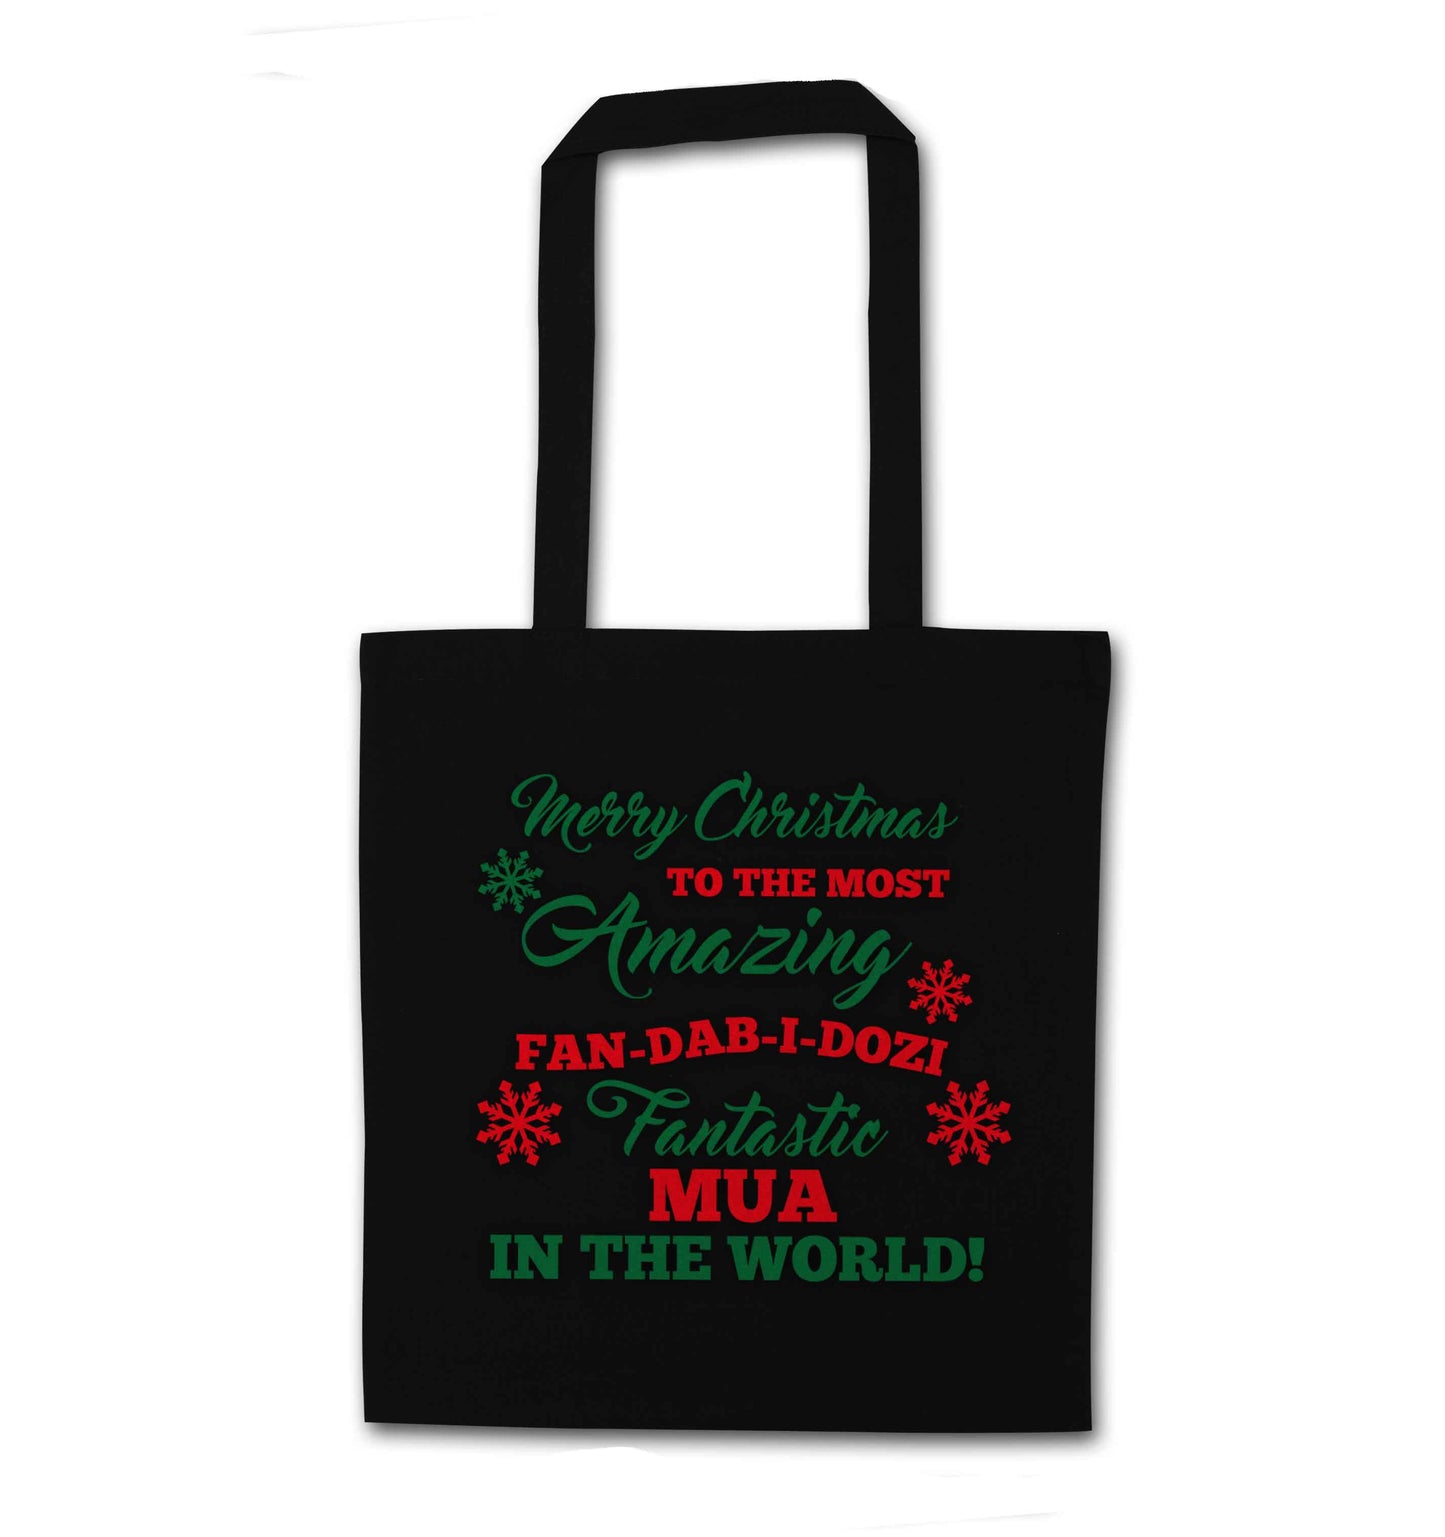 Merry Christmas to the most amazing fan-dab-i-dozi fantasic MUA in the world black tote bag